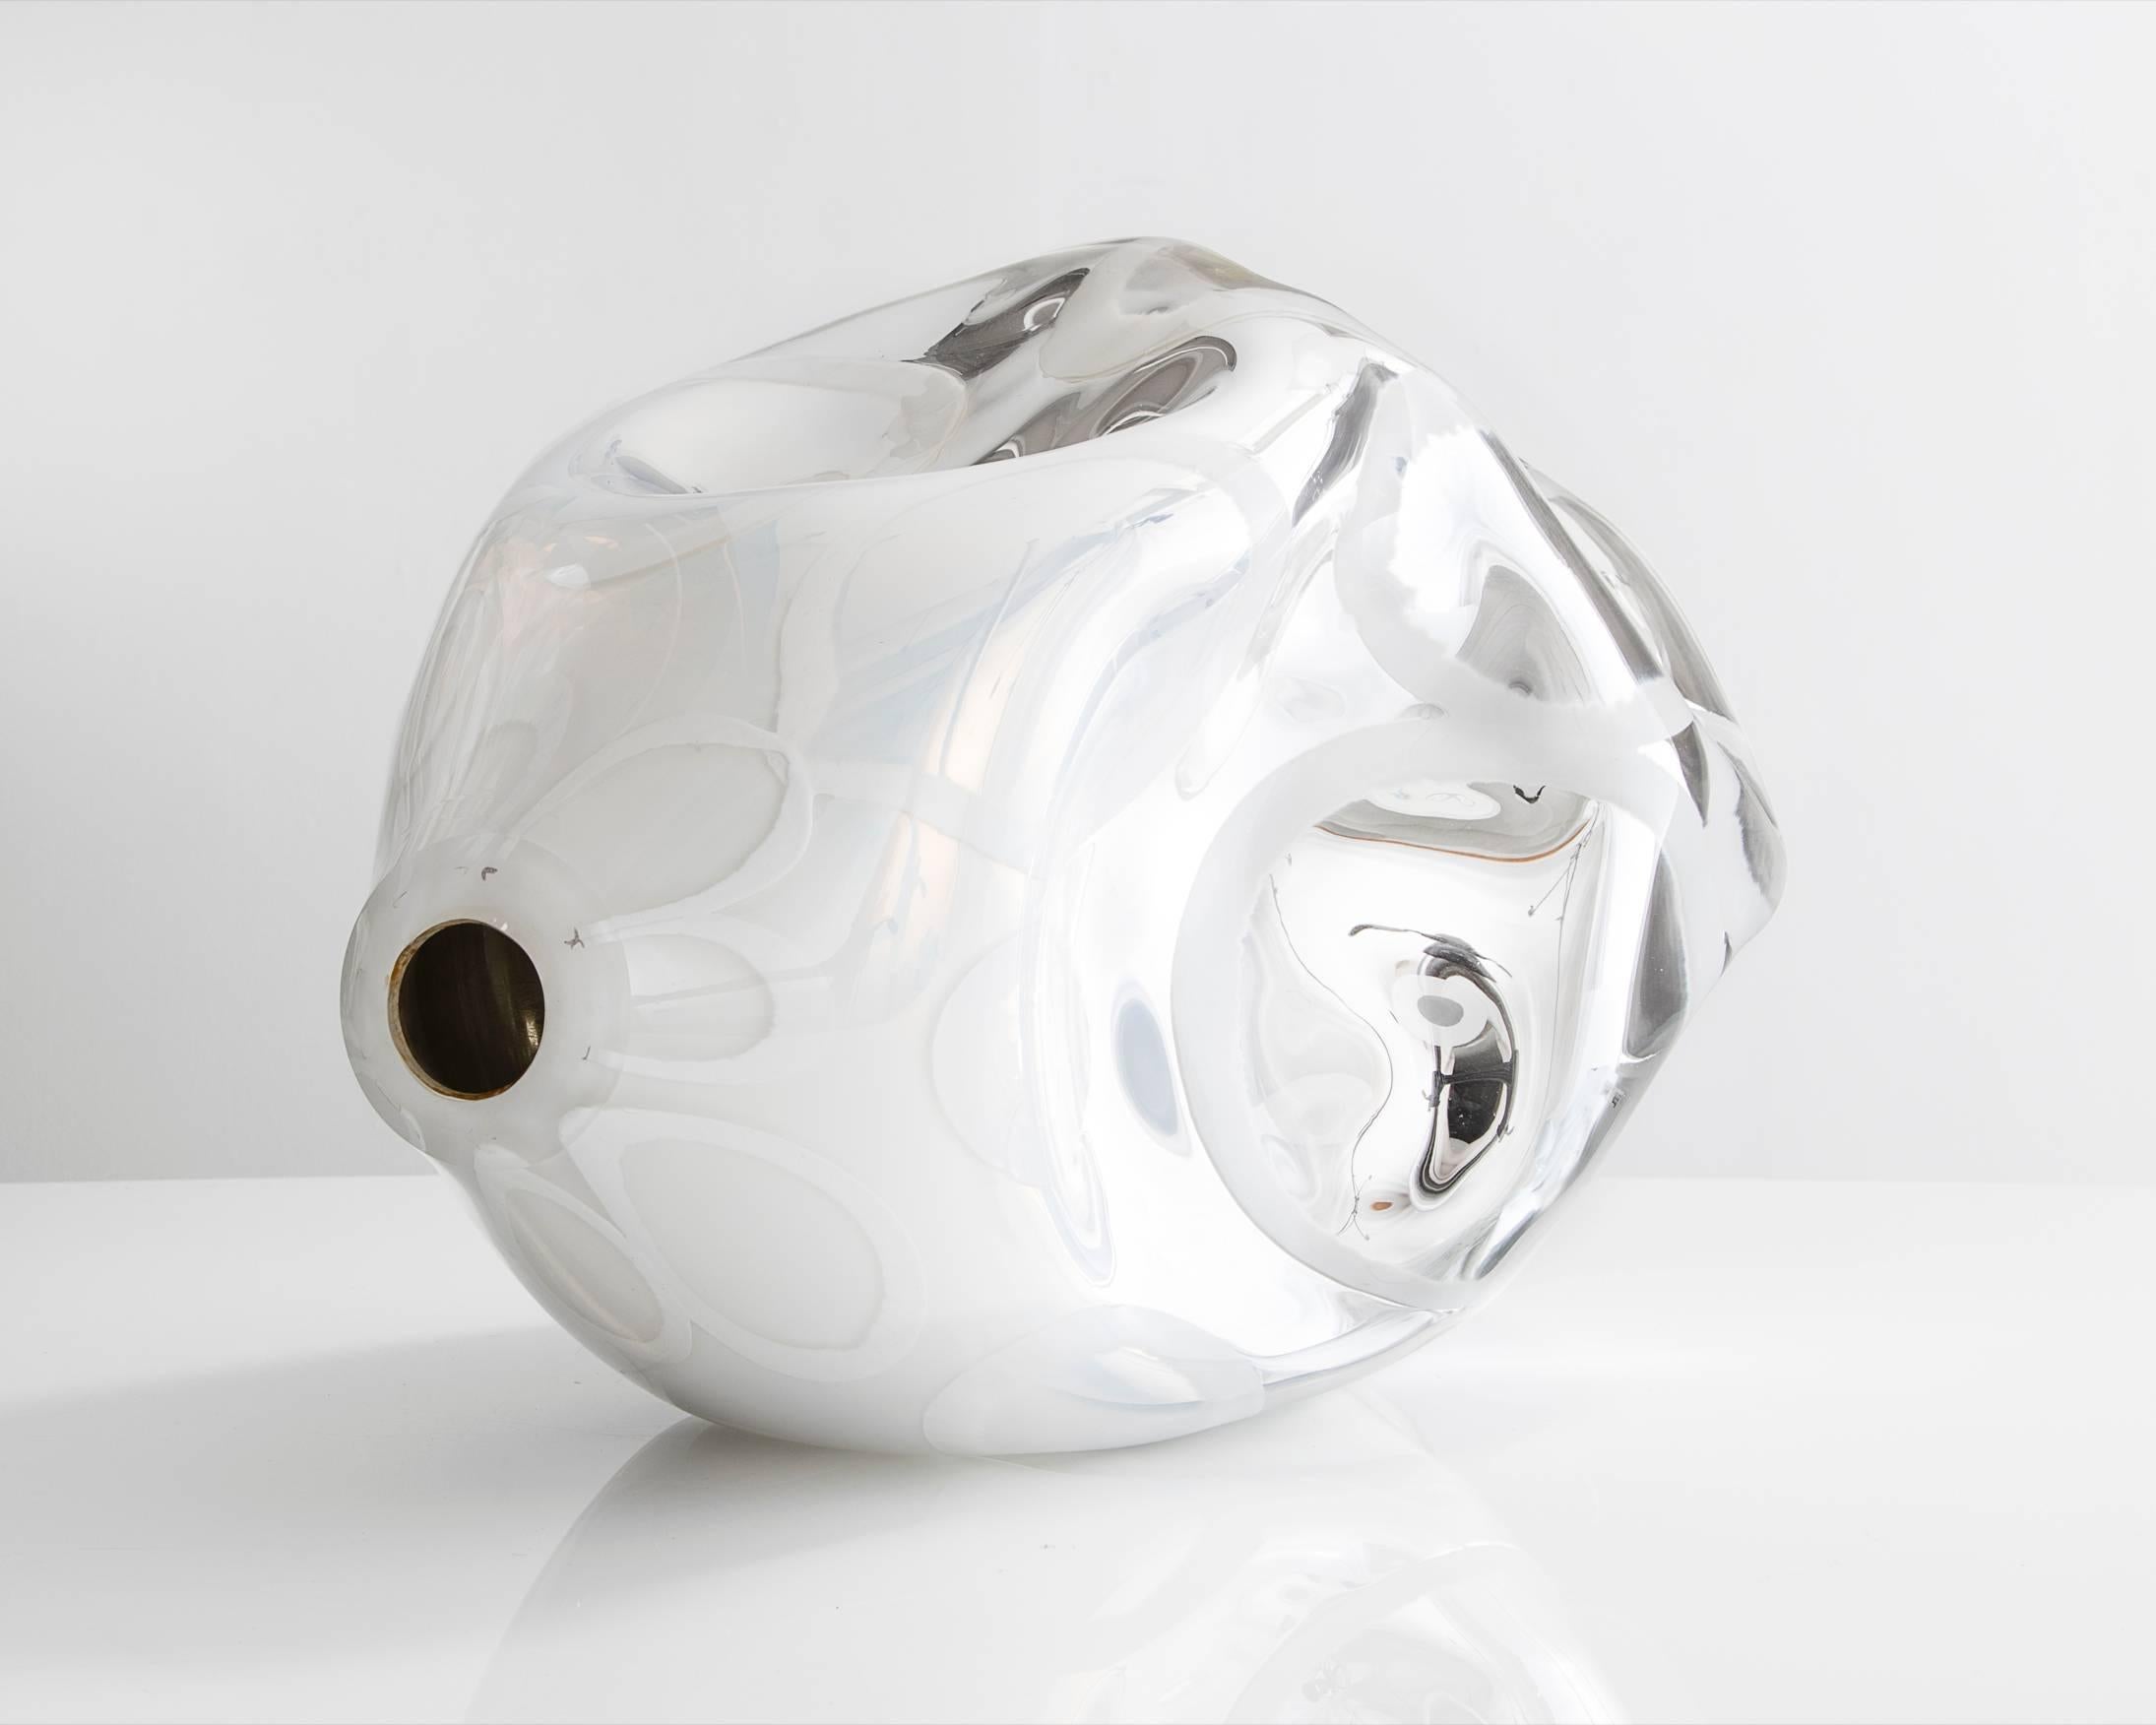 Unique Mirroring Dented Murrine vessel in handblown glass. Designed and made by Jeff Zimmerman, New York, 2015.